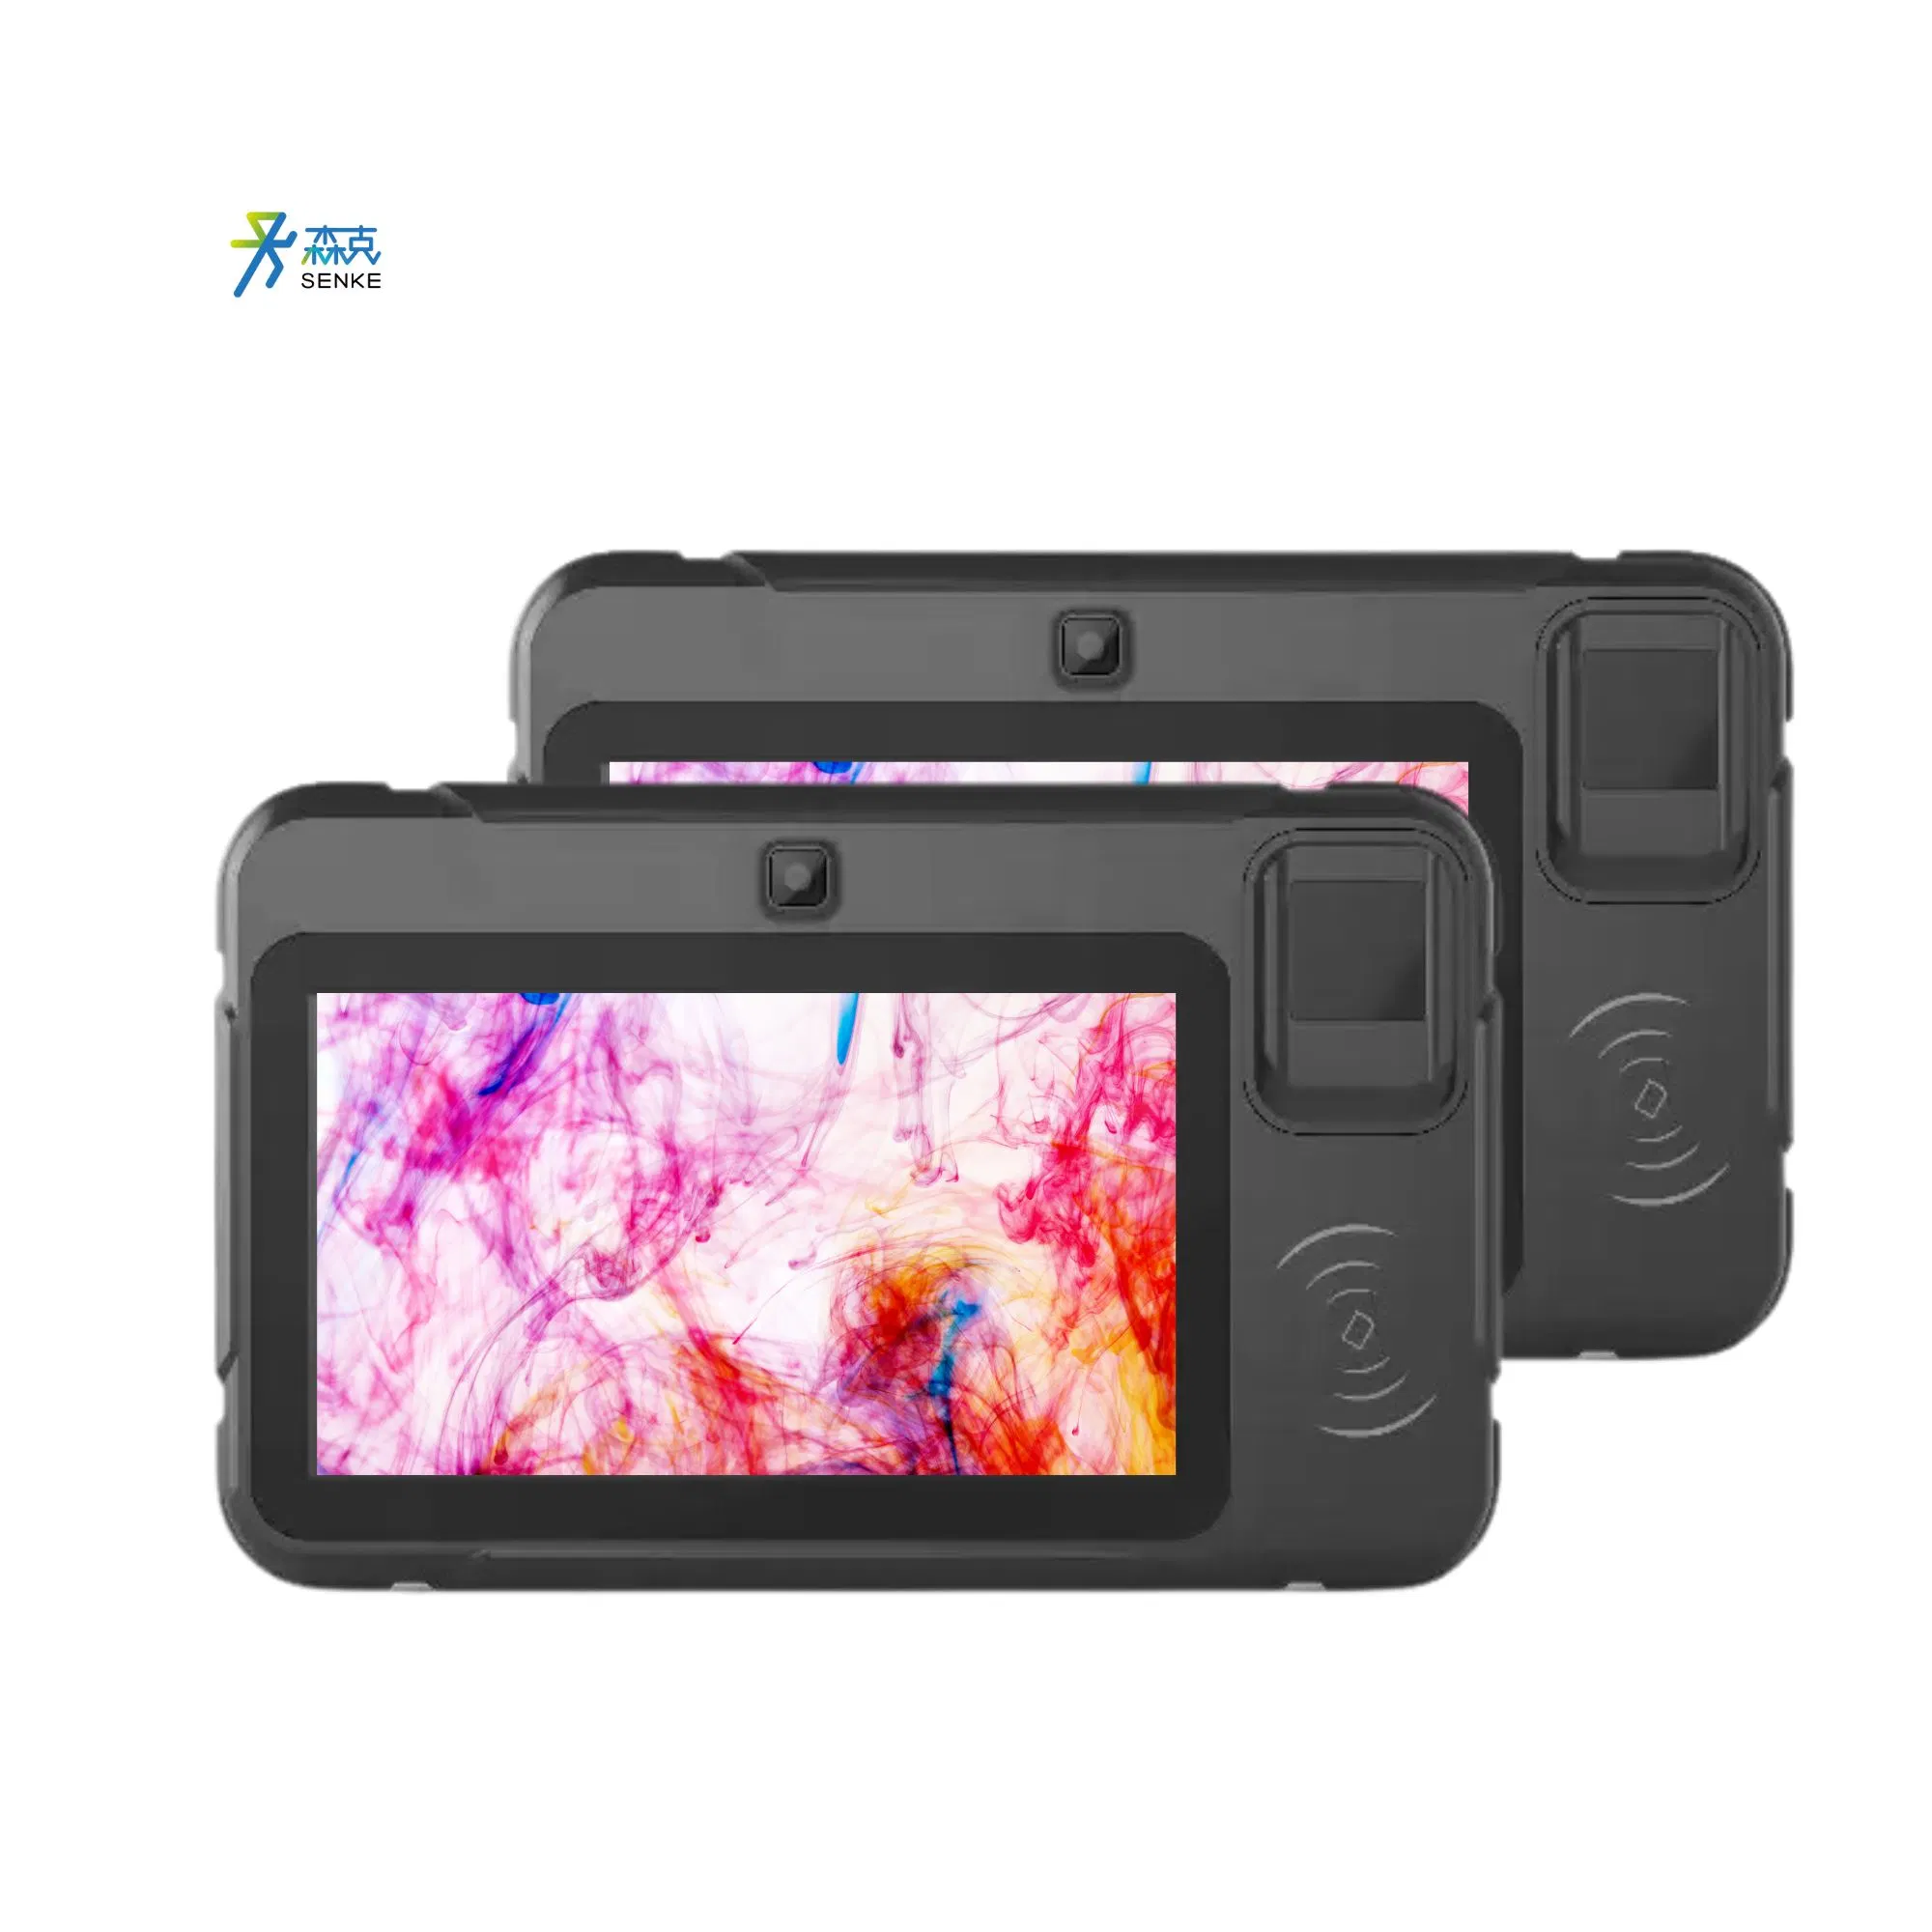 OEM 10" Android 9.0 Rugged Tablet, IP68 Waterproof 4G LTE GPS NFC 10000mAh Thin and Light Design Tablet